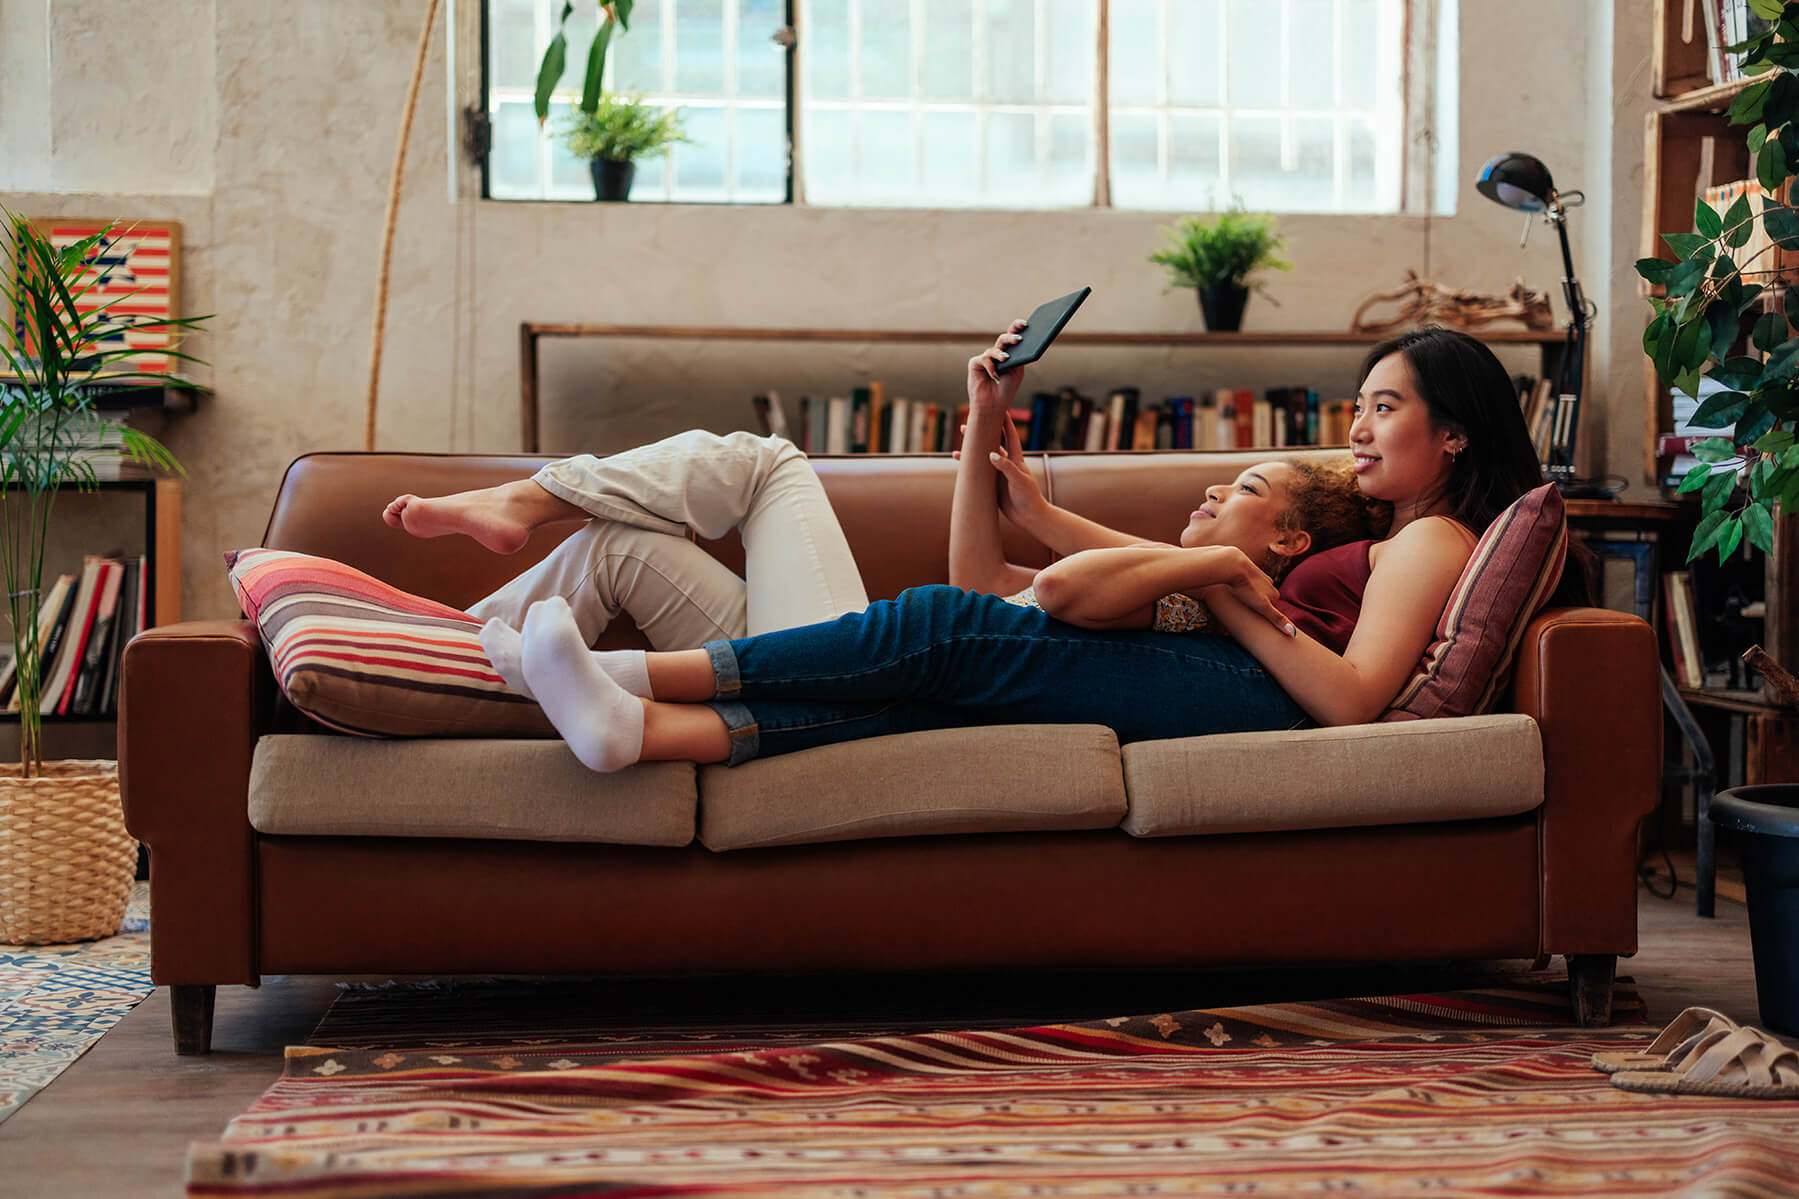 2 women lying on the sofa together both watching something on a tablet